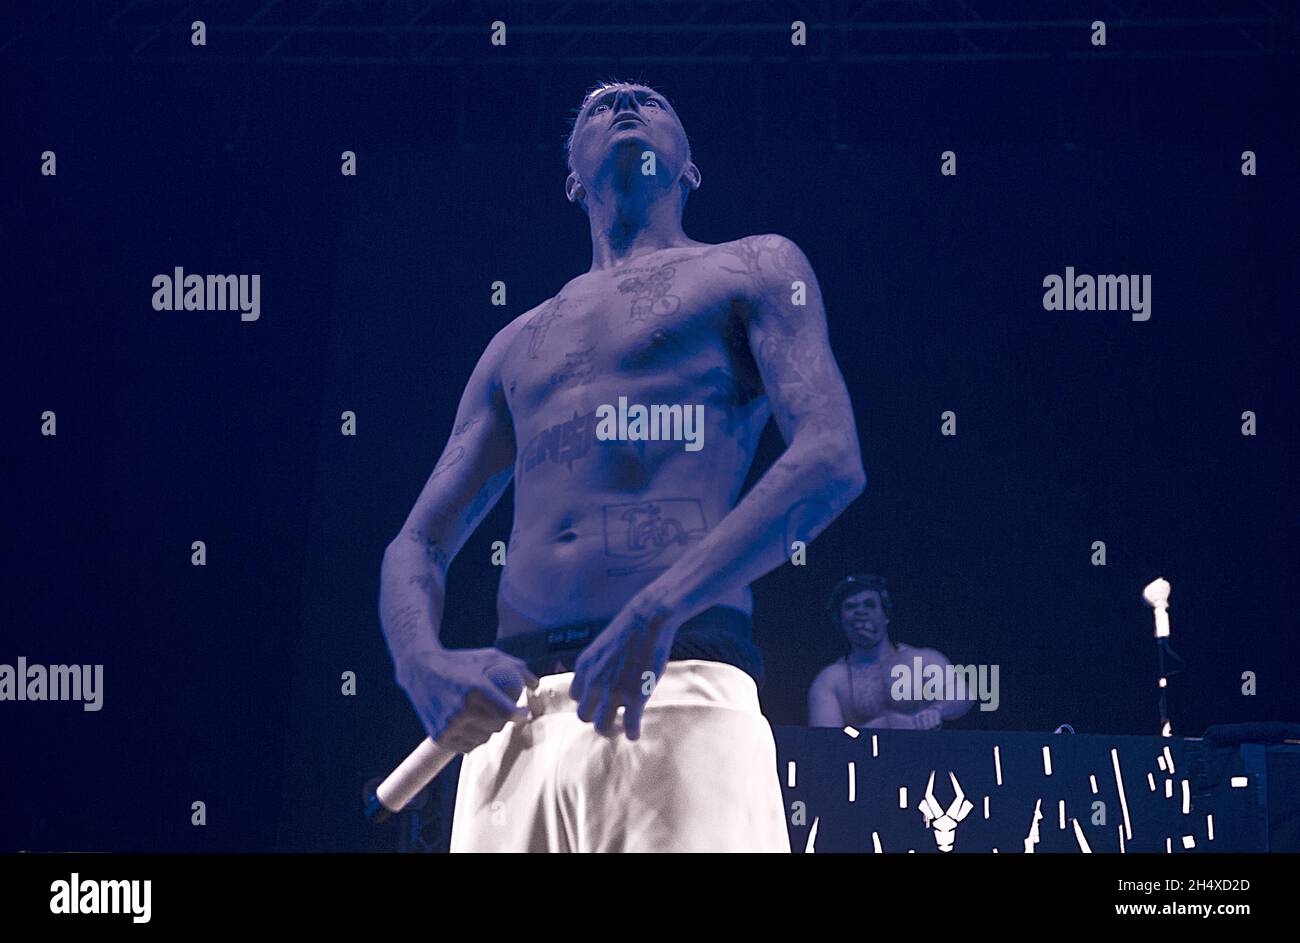 Ninja of Die Antwoord in concert at Brixton Academy - London Stock Photo